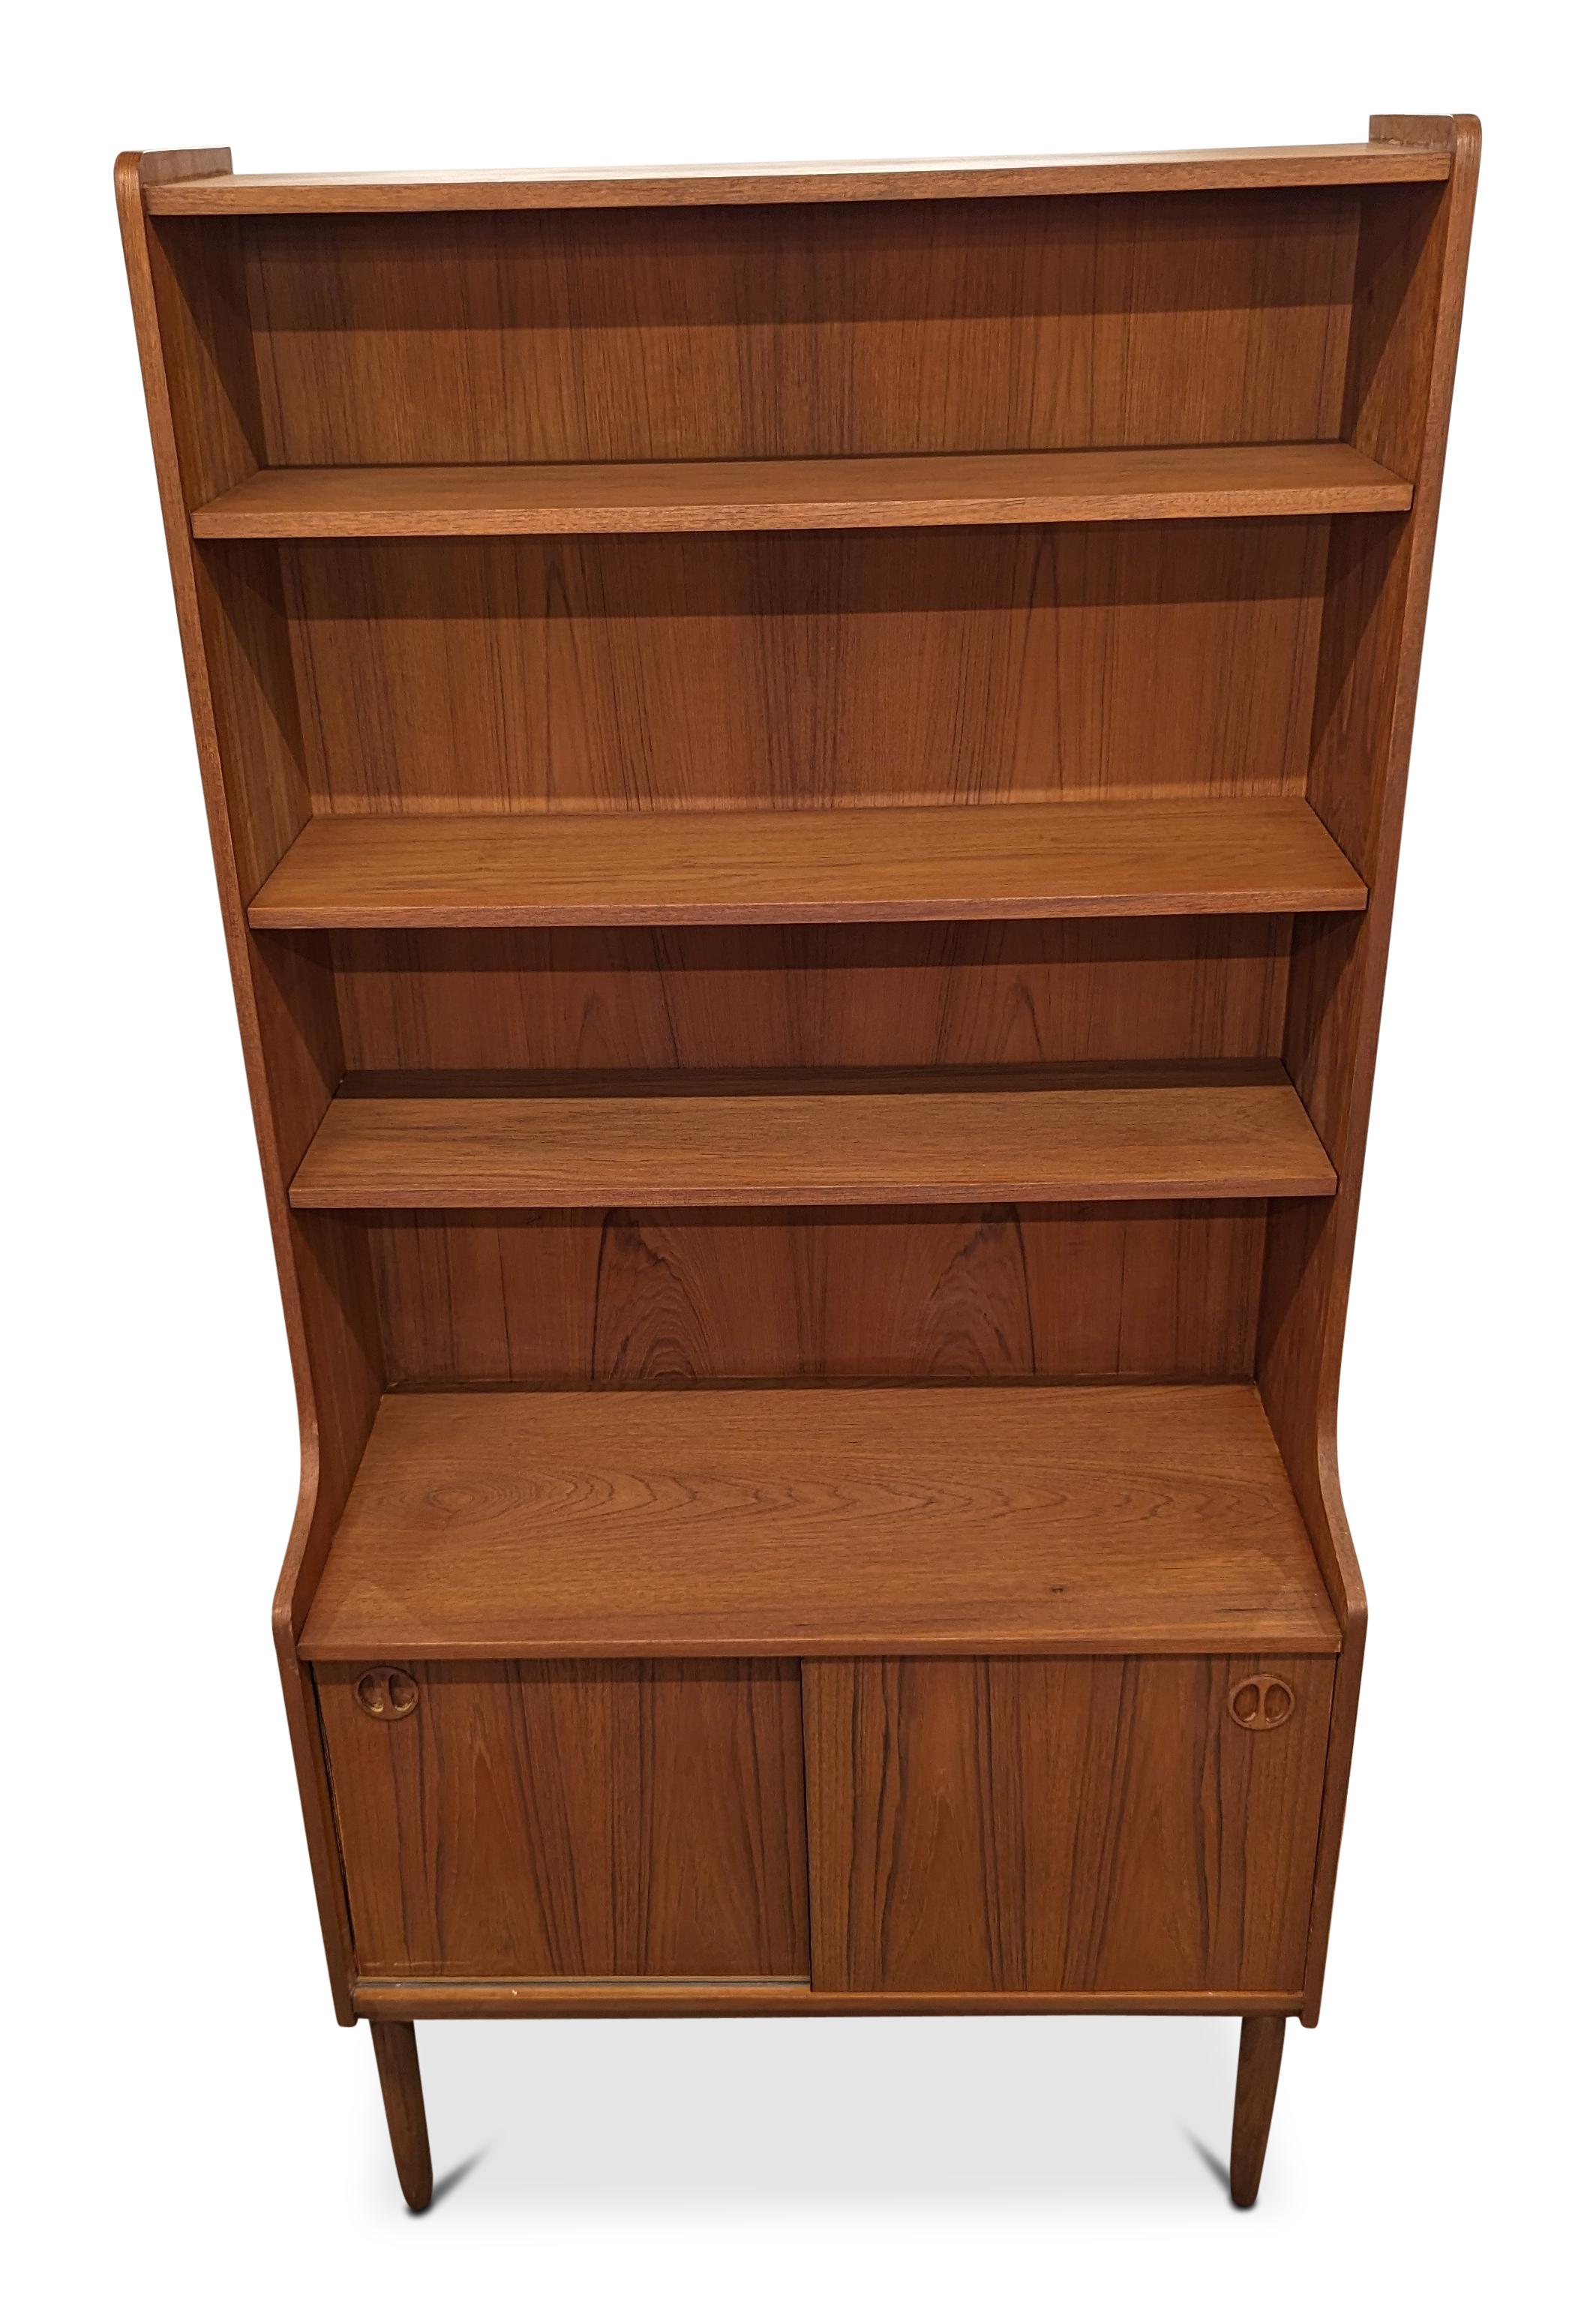 Vintage Danish Mid Century Teak Bookcase - 022403 In Good Condition For Sale In Jersey City, NJ